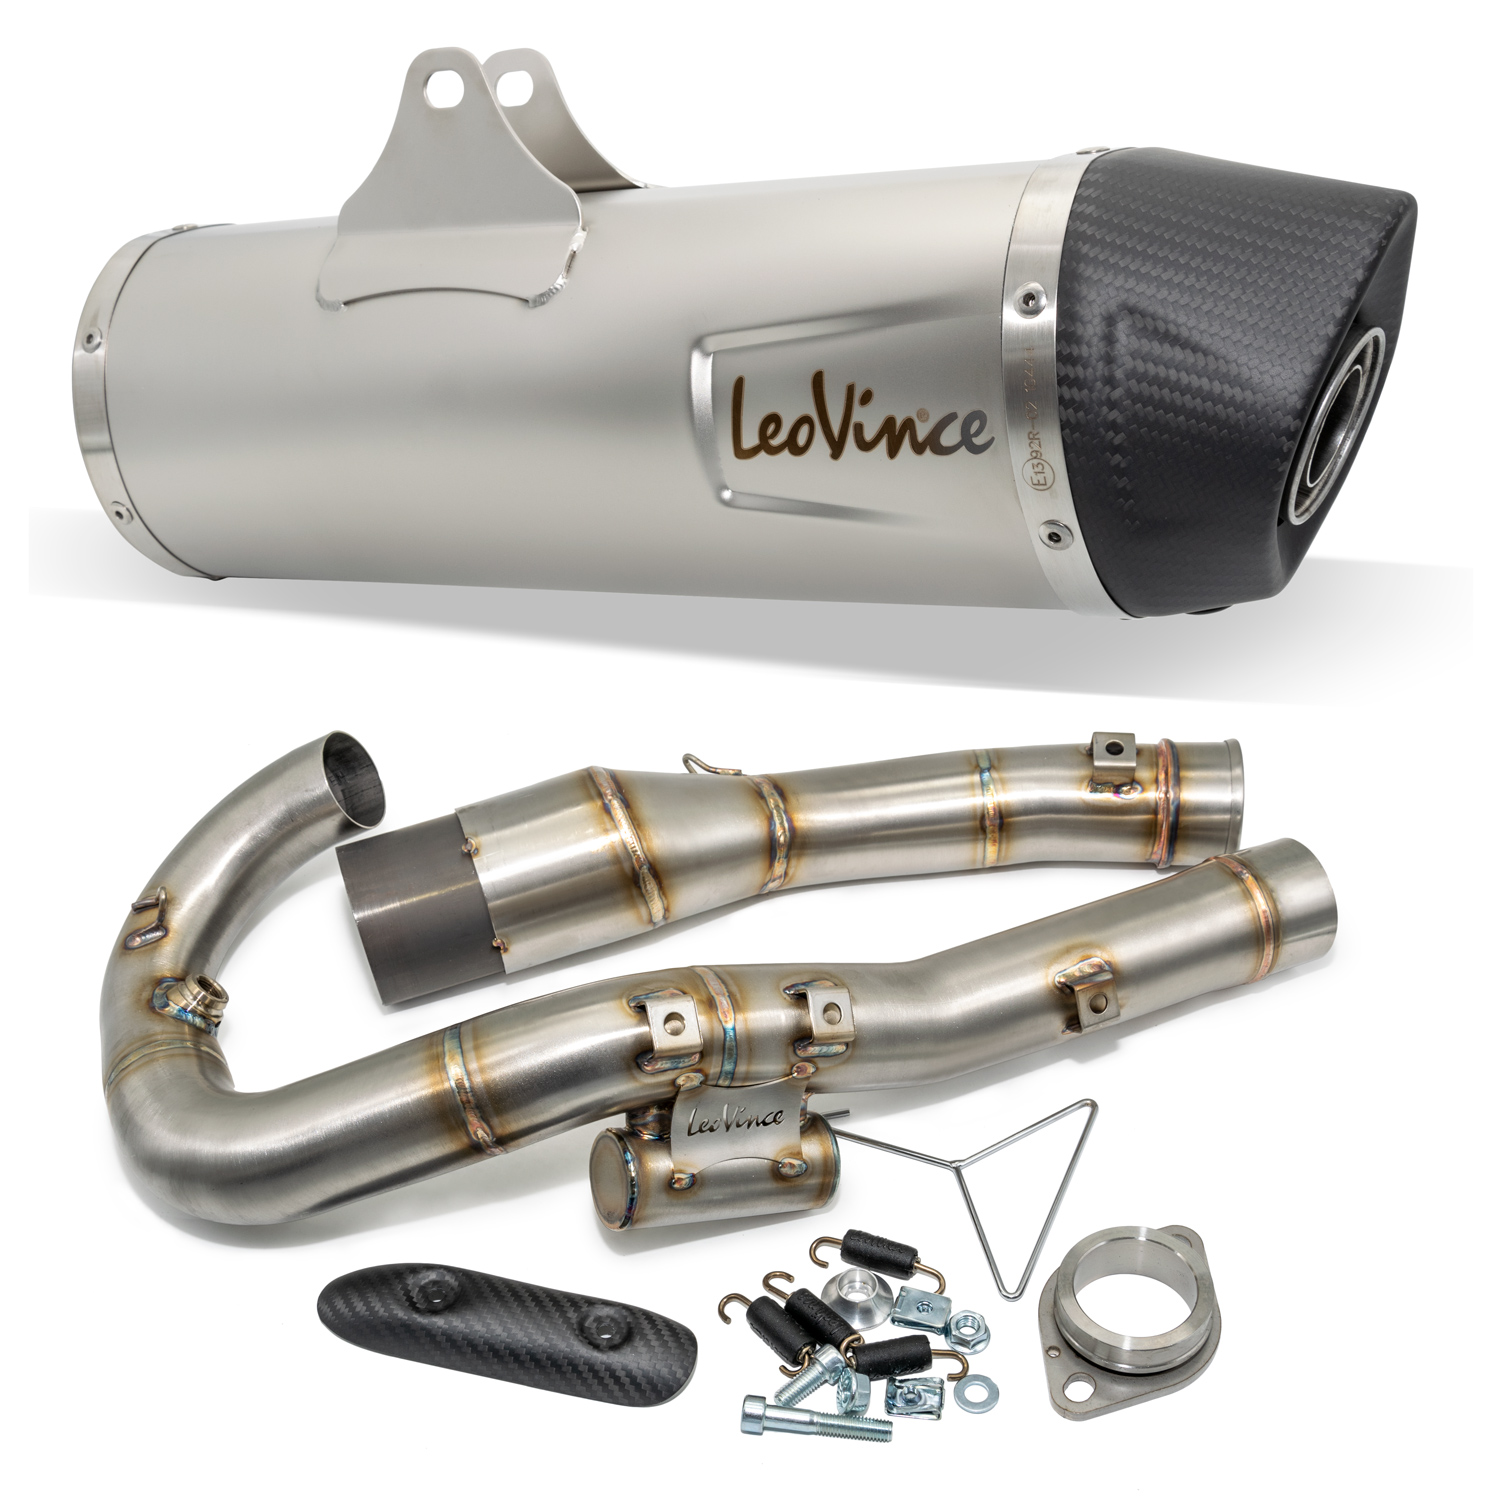 DB Killer LeoVince exhaust silencer SBK for LV-10  Heavy Tuned: Cheap  spareparts for Scooter, Bikes, Motorcycles & Vespa